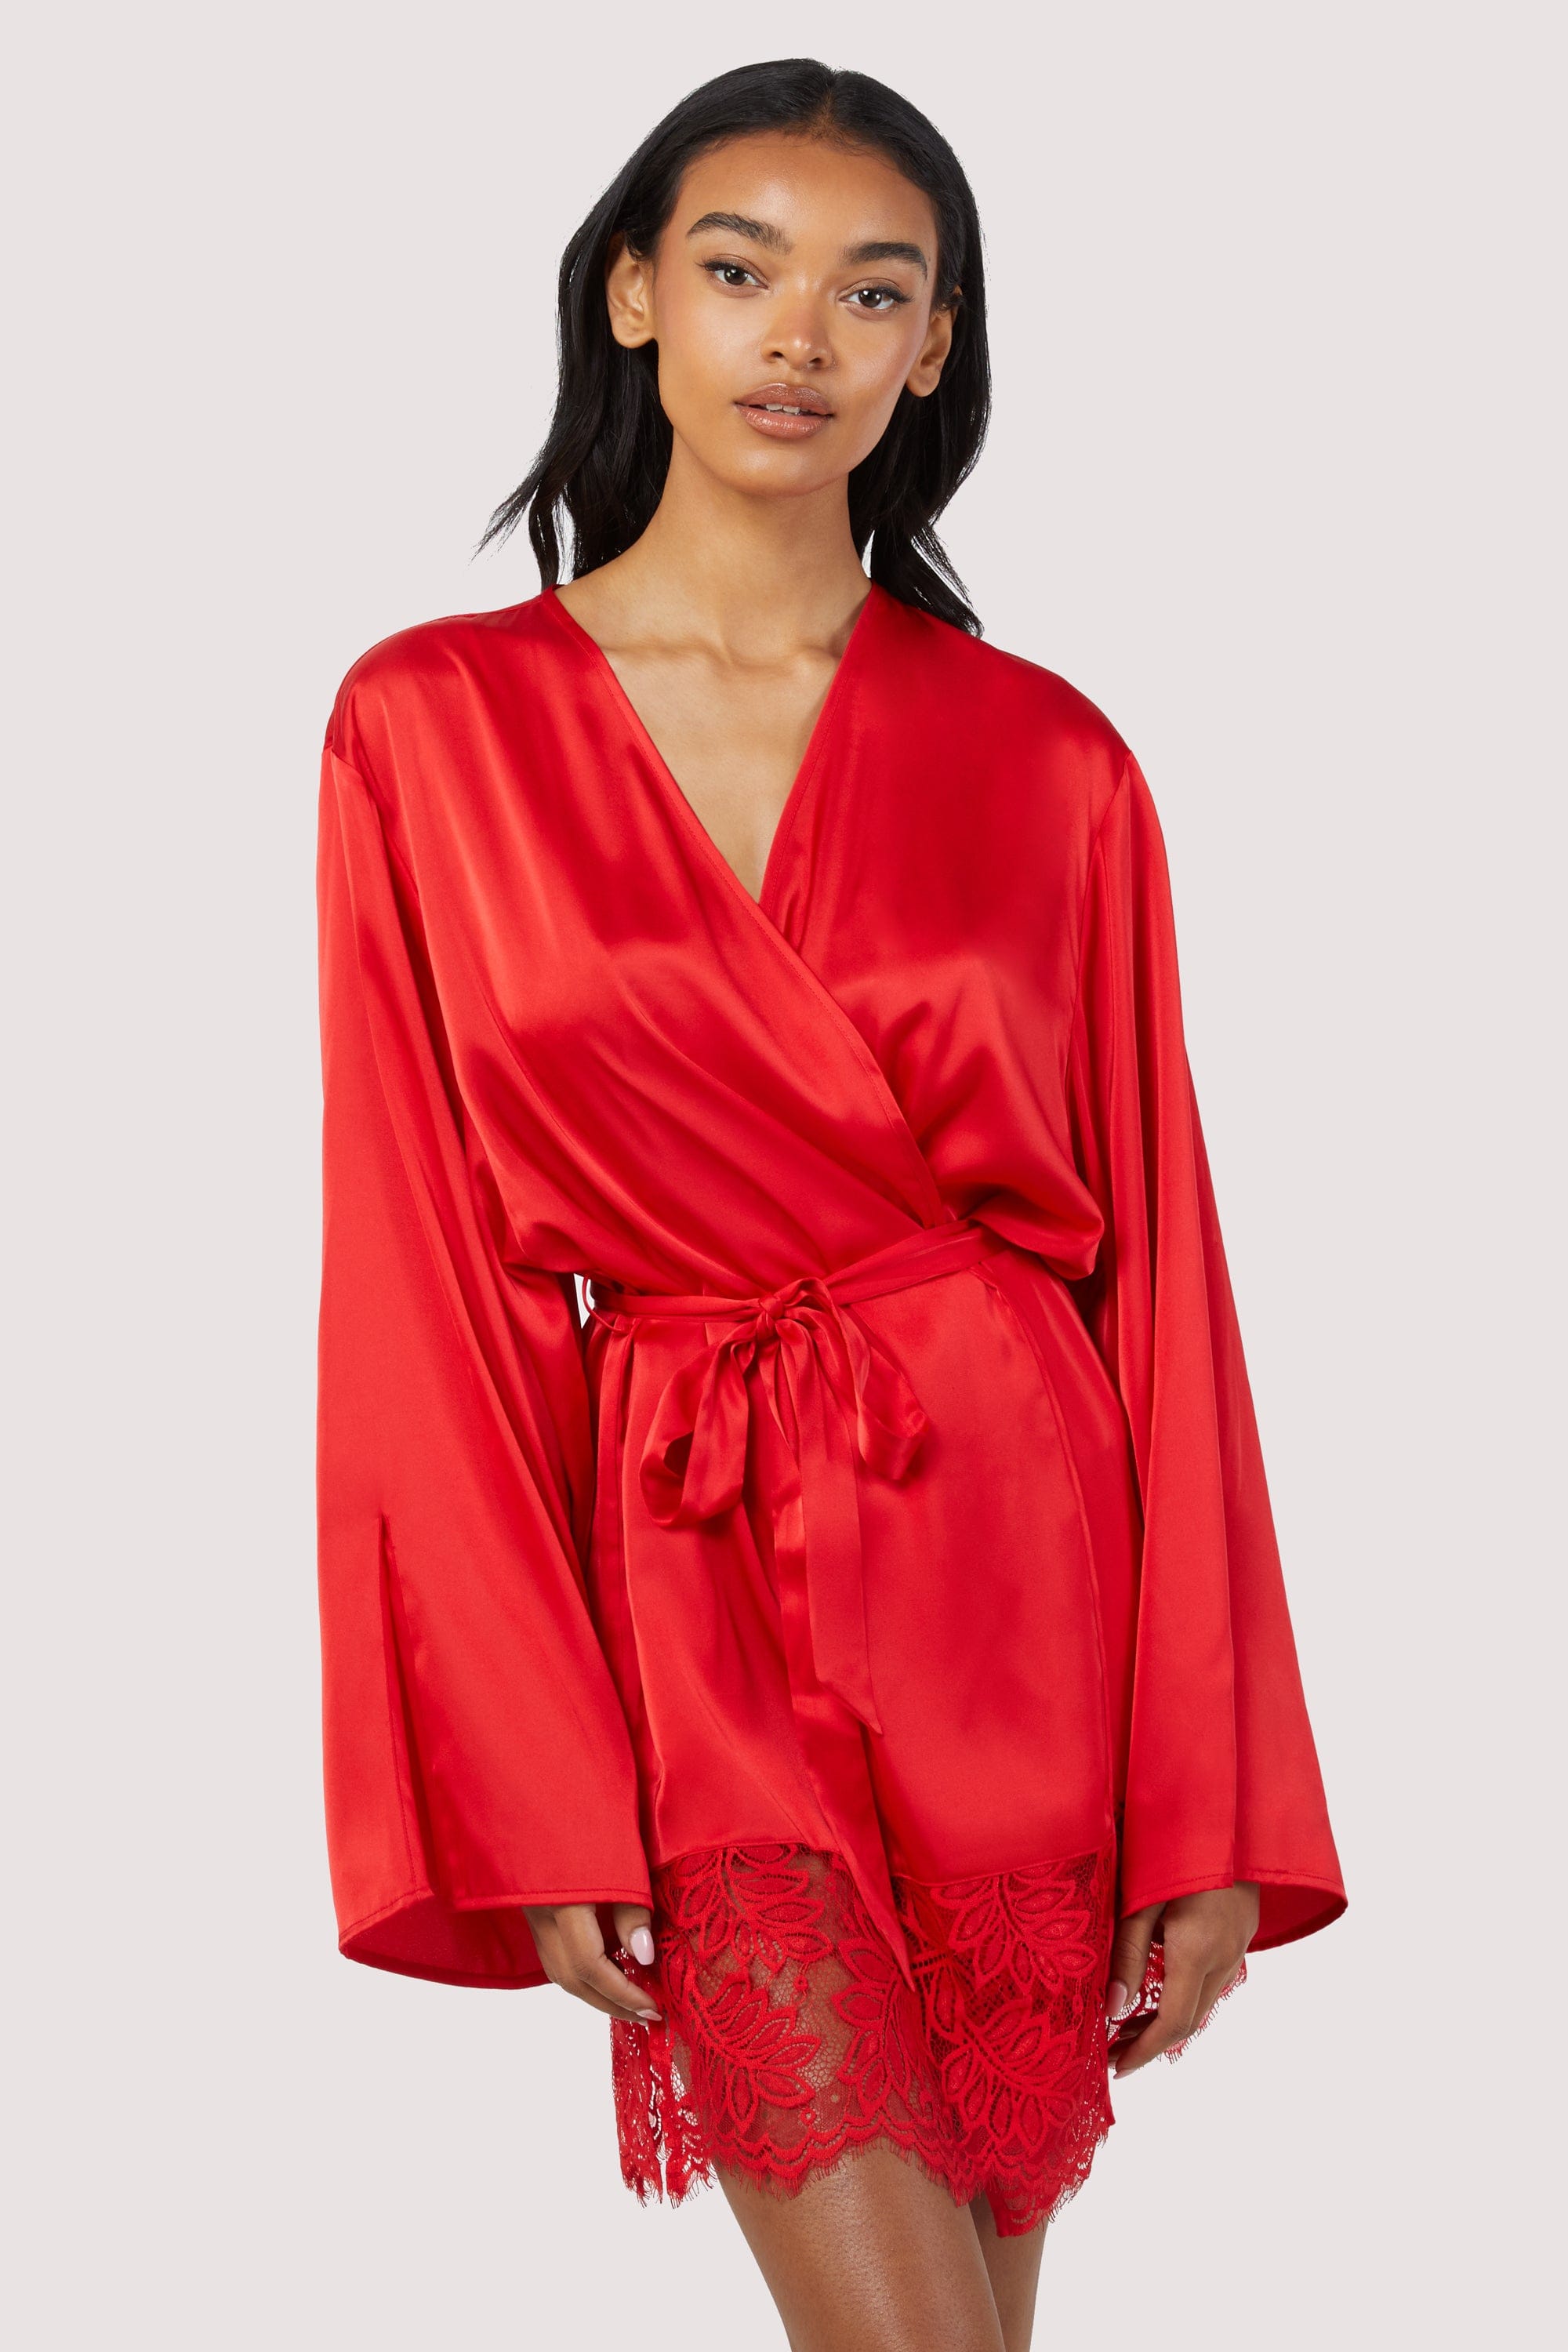 Rosie Red Satin and Lace Robe UK 8